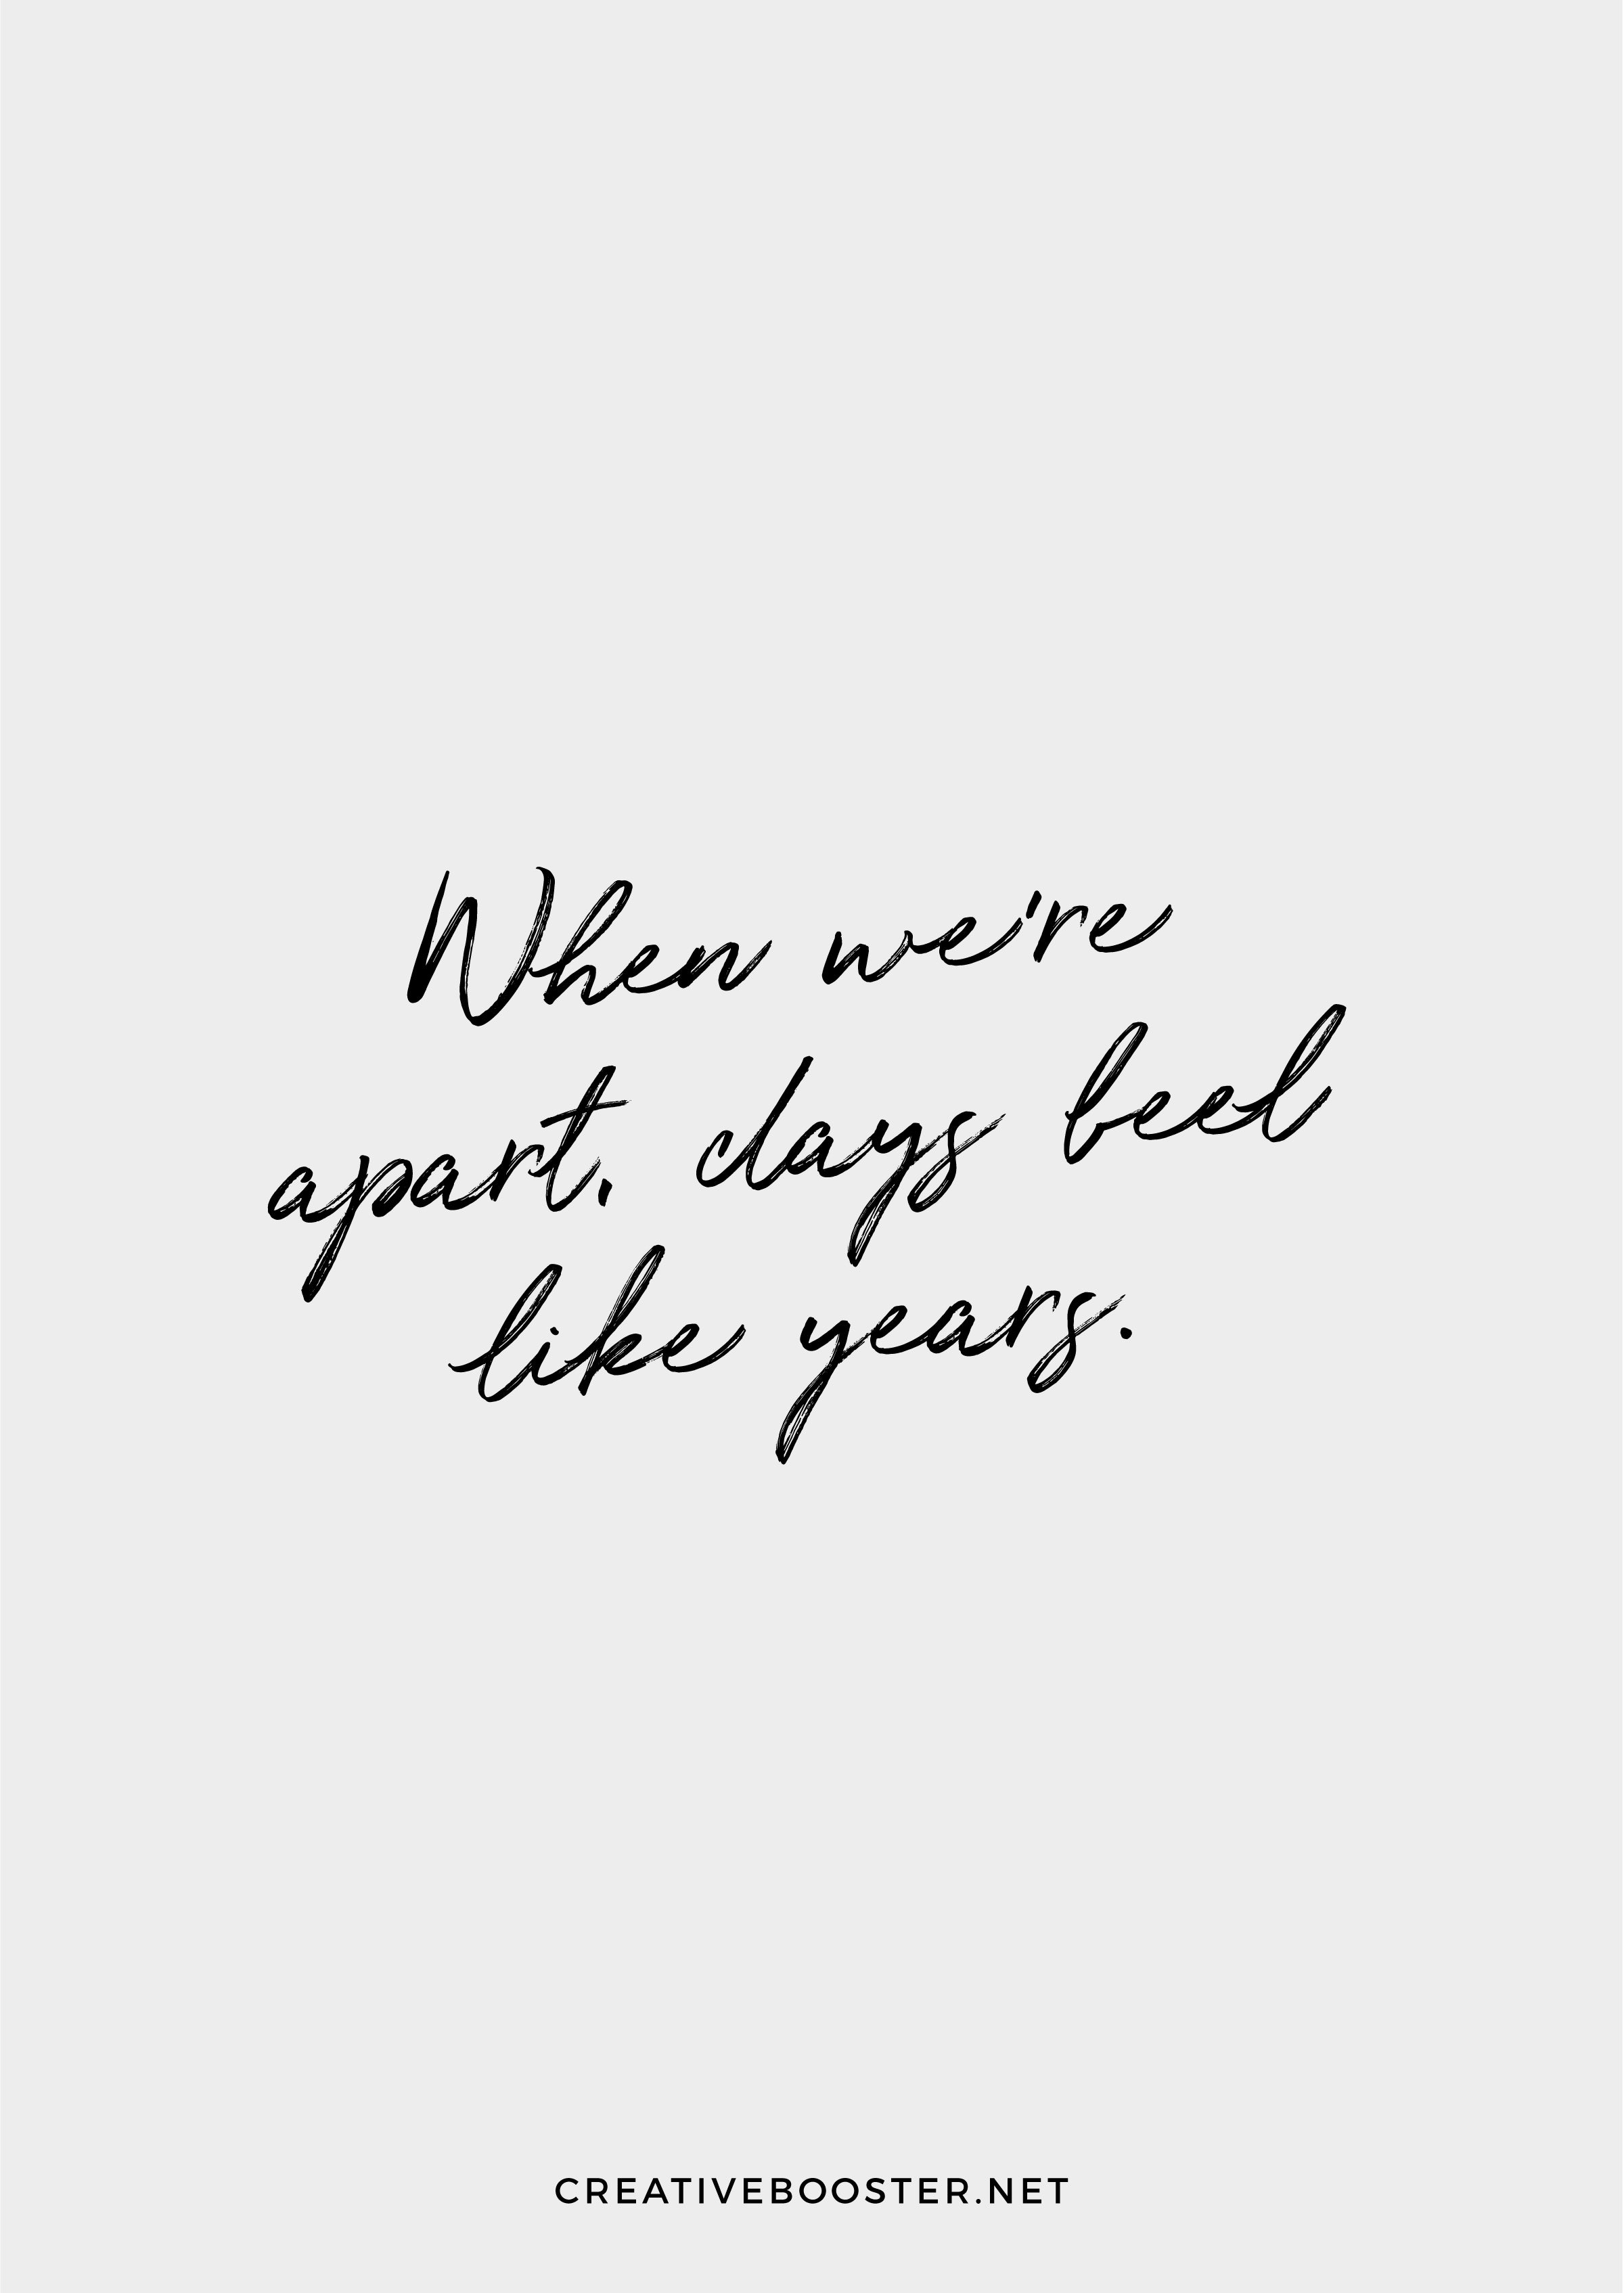 "When we're apart, days feel like years." — Unknown